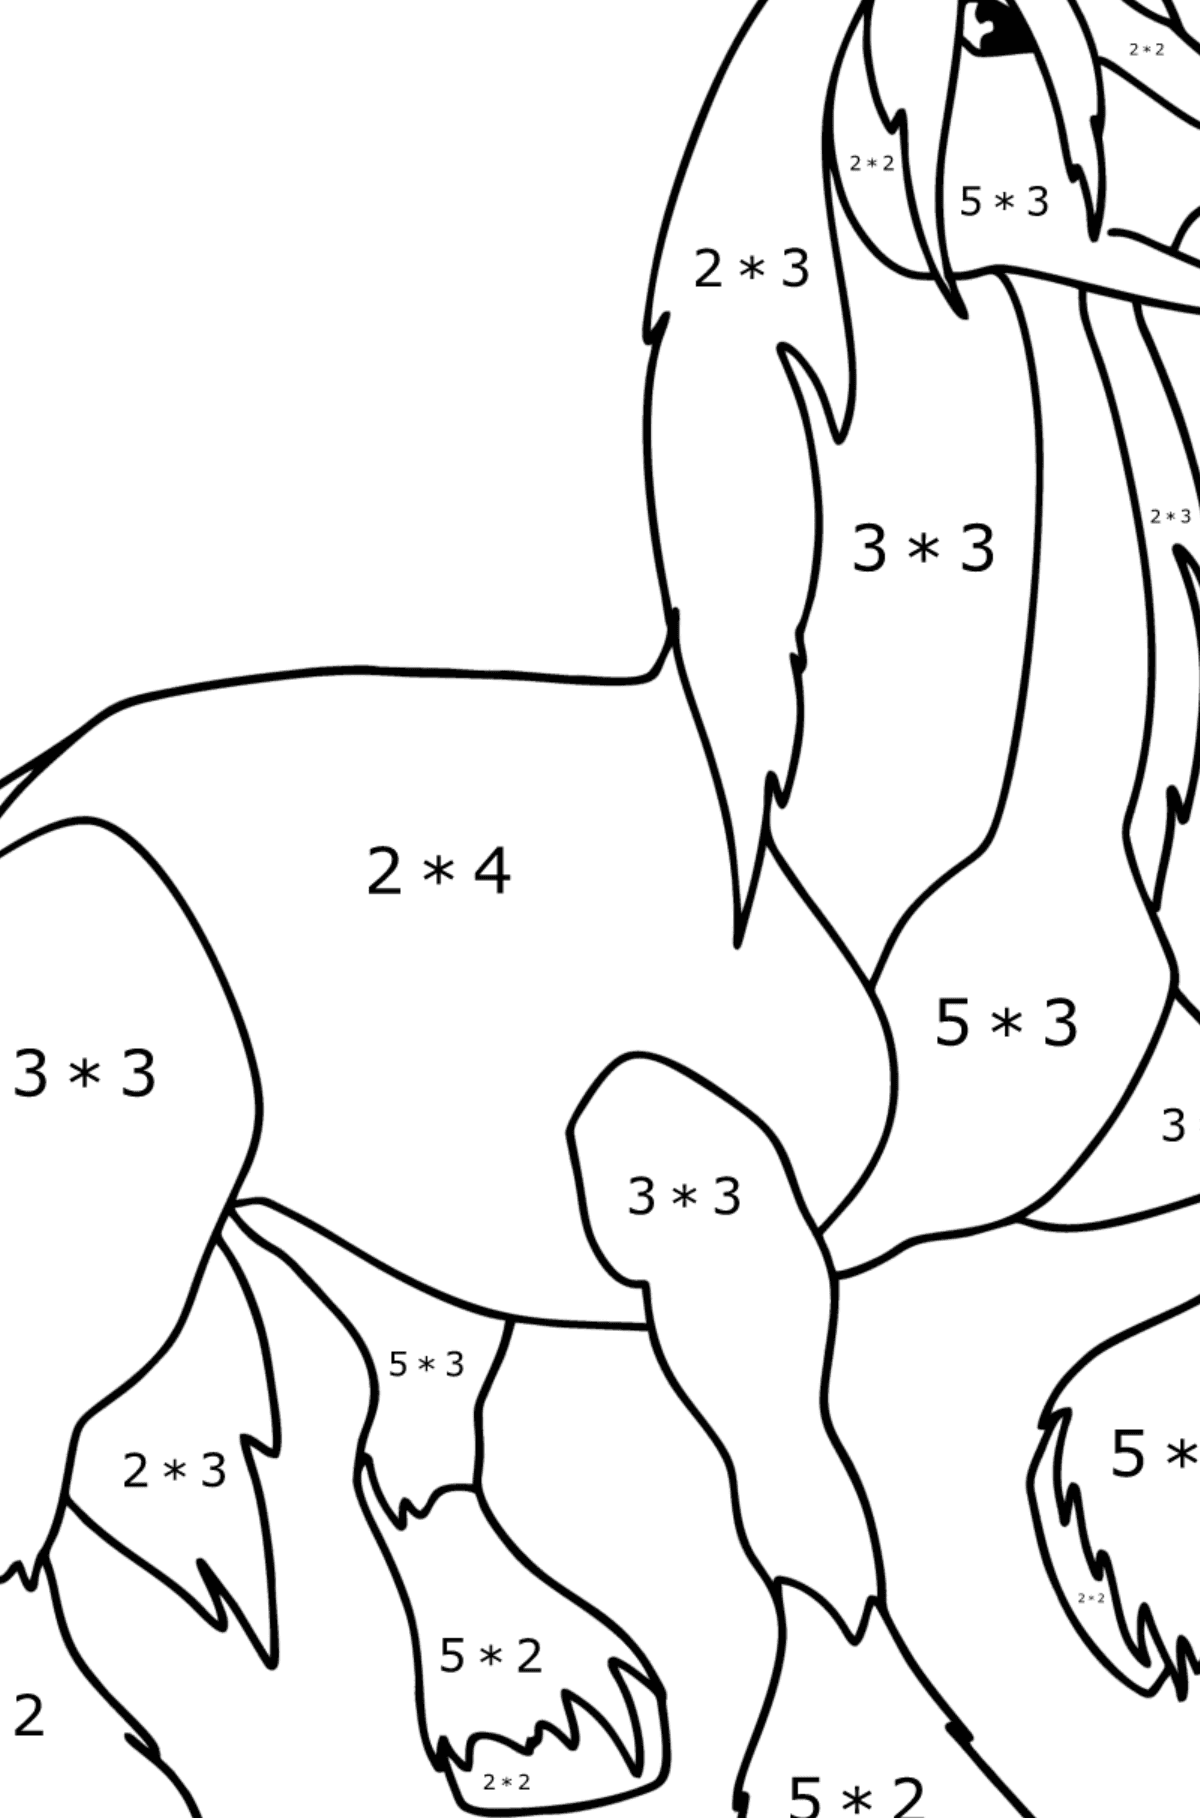 Draft horse сoloring page - Math Coloring - Multiplication for Kids